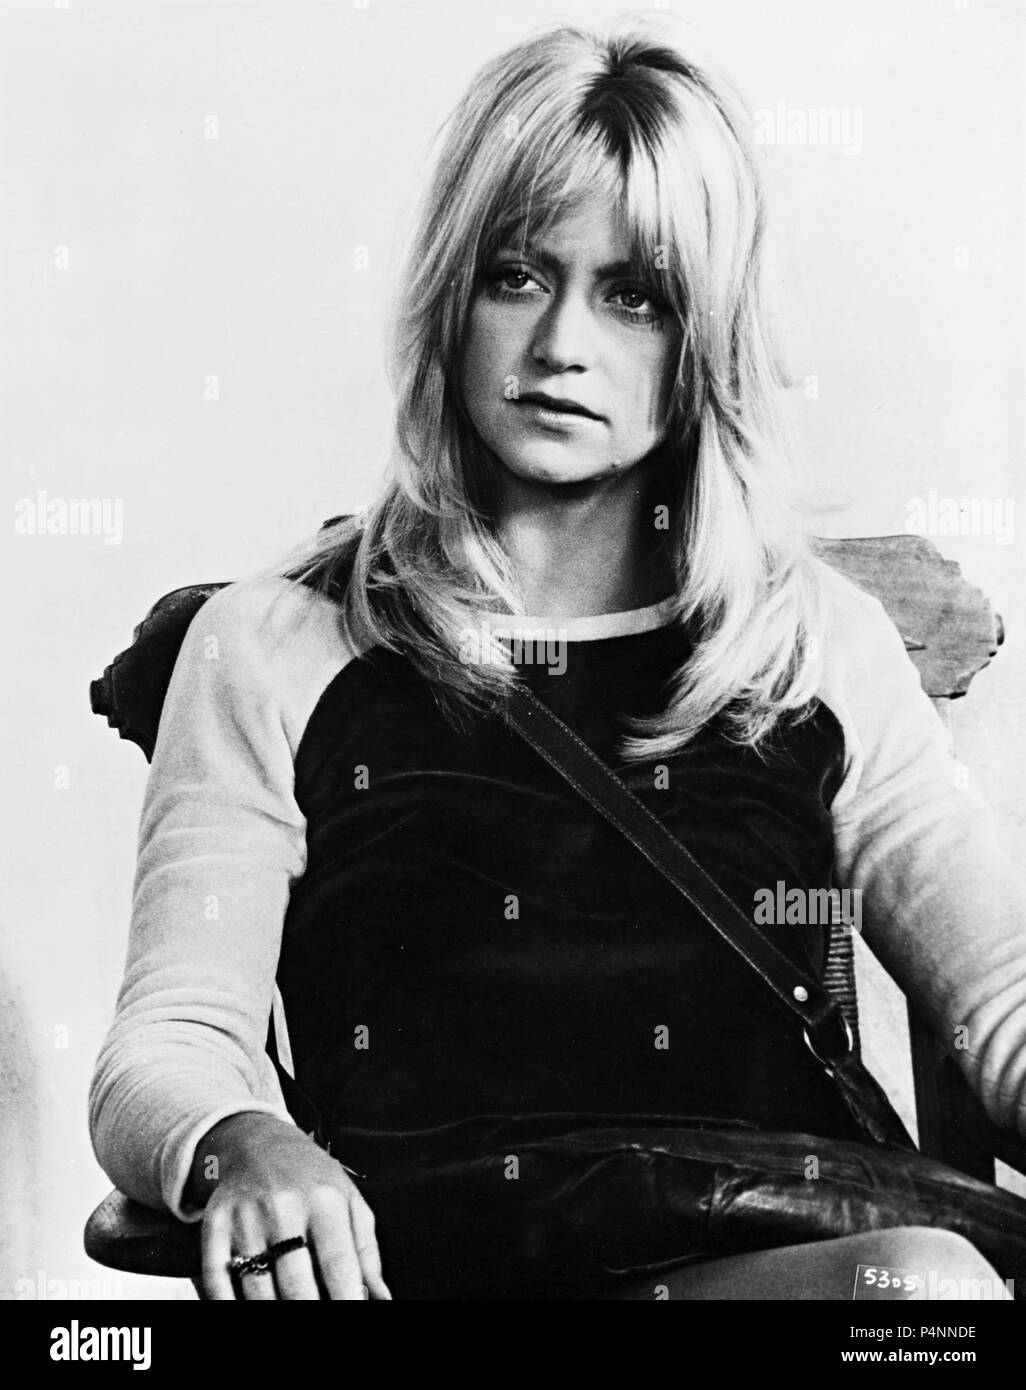 Original Film Title: SHAMPOO.  English Title: SHAMPOO.  Film Director: HAL ASHBY.  Year: 1975.  Stars: GOLDIE HAWN. Credit: COLUMBIA PICTURES / Album Stock Photo